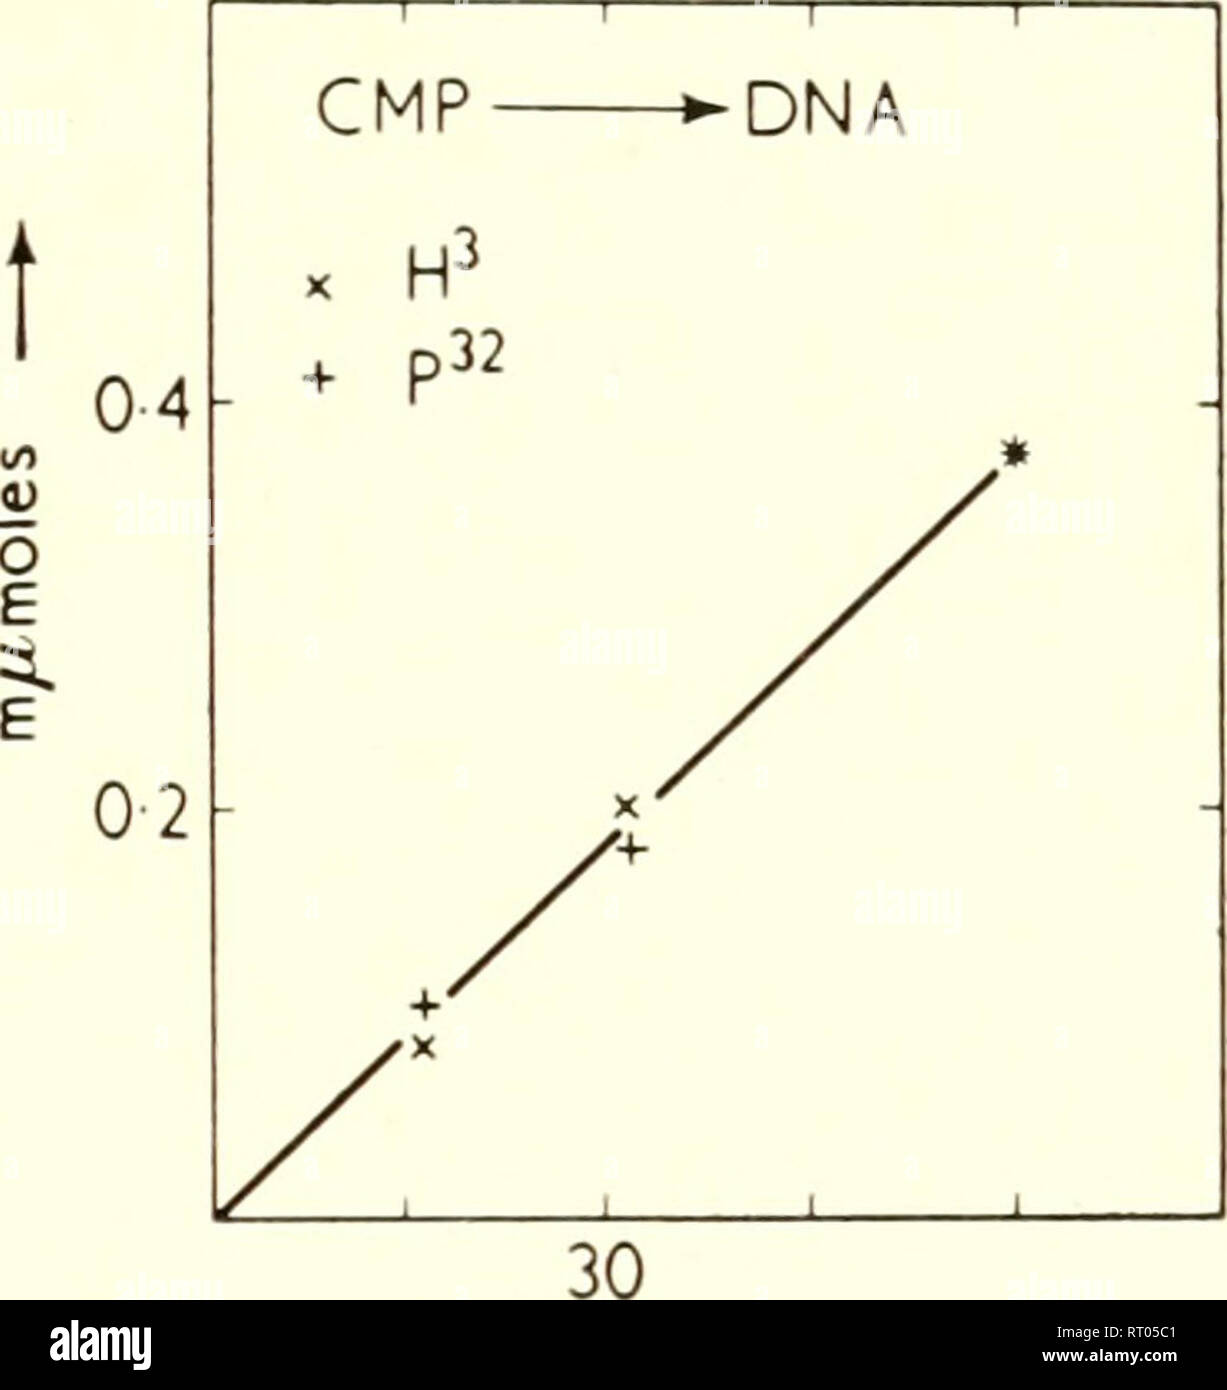 . Biological structure and function; proceedings. Biochemistry; Cytology. ENZYMK- FORMATION OF DEOXYRIBONUCLEIC ACID 105 that the labelled deoxyribonucleotide was subsequently used for DNA synthesis. In the experiment described in Fig. 2 DNA was synthesized. Fig. I. Time curve of DX.A formation from tritium or ''-P-labelled CMP, as measured by the incorporation of isotope into DNA [7, 8]. Incubation conditions for one time point: o • i ^tmole of labelled CMP, i o /^^mole of ATP, 5 -o /^imoles of MgCl,, o-i mg. of heated DNA (10 min. at 100 ) and 4-5 mg. of &quot;enzTne&quot;, final volume 0-4 Stock Photo